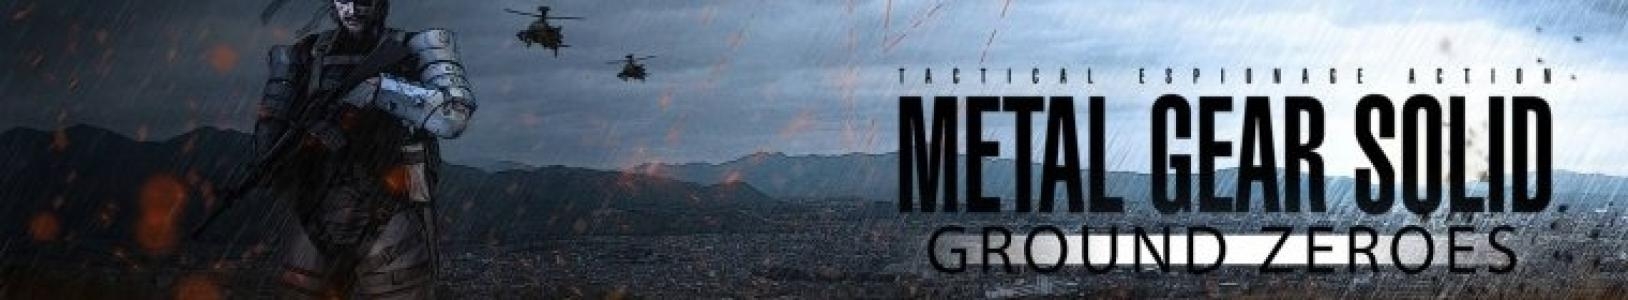 Metal Gear Solid V: Ground Zeroes banner